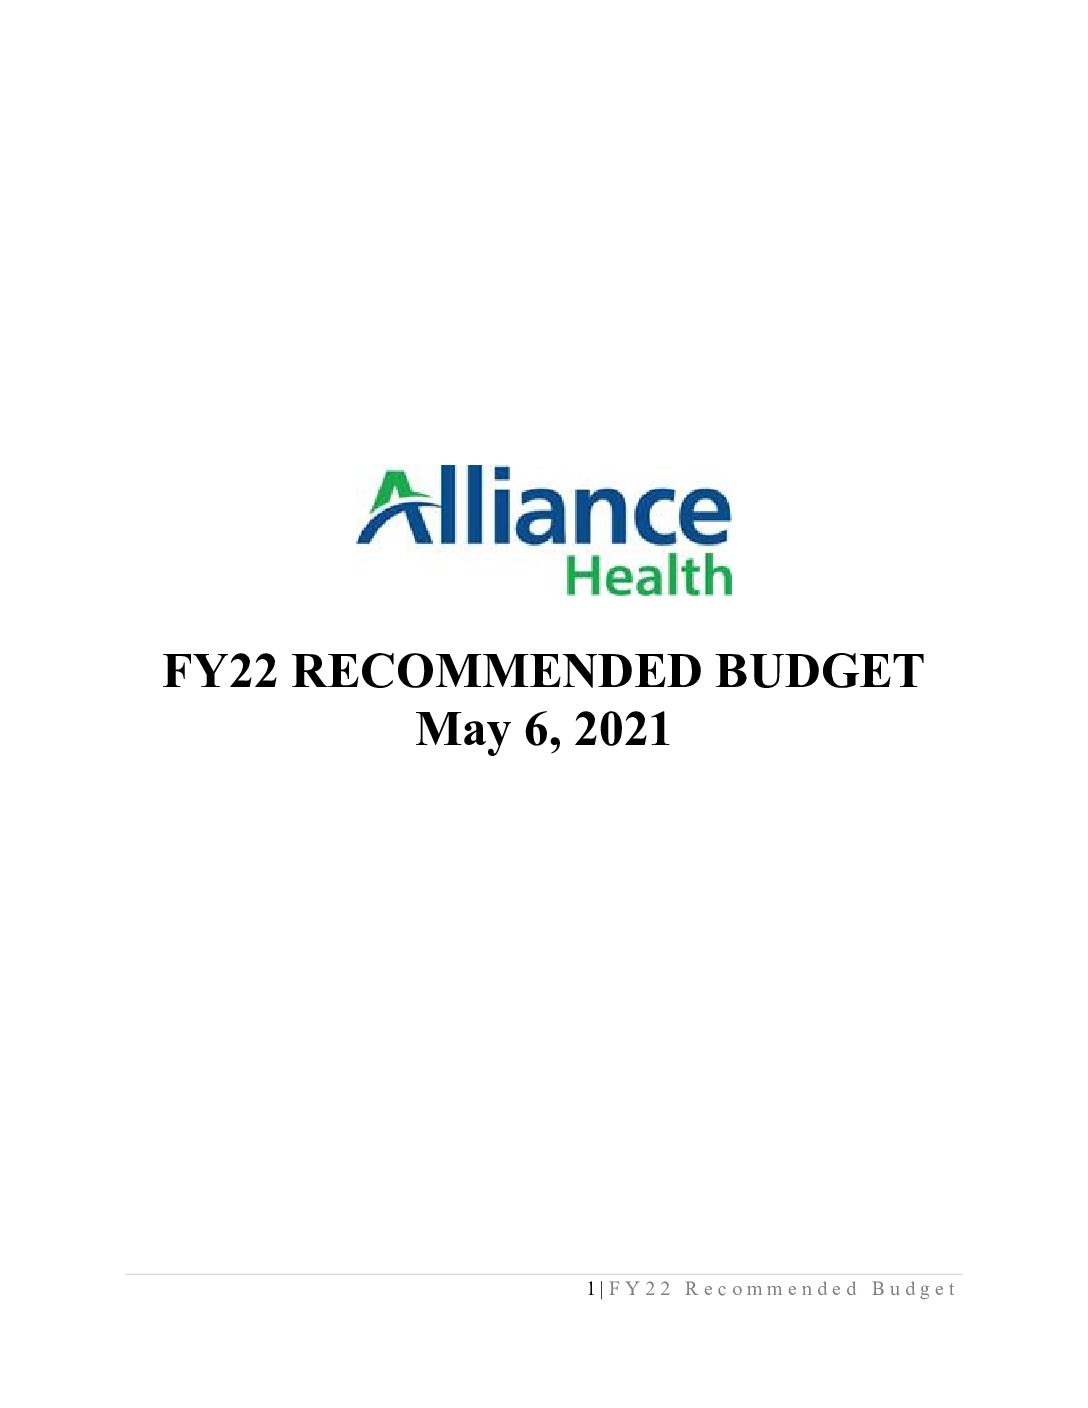 FY22 Recommended Budget